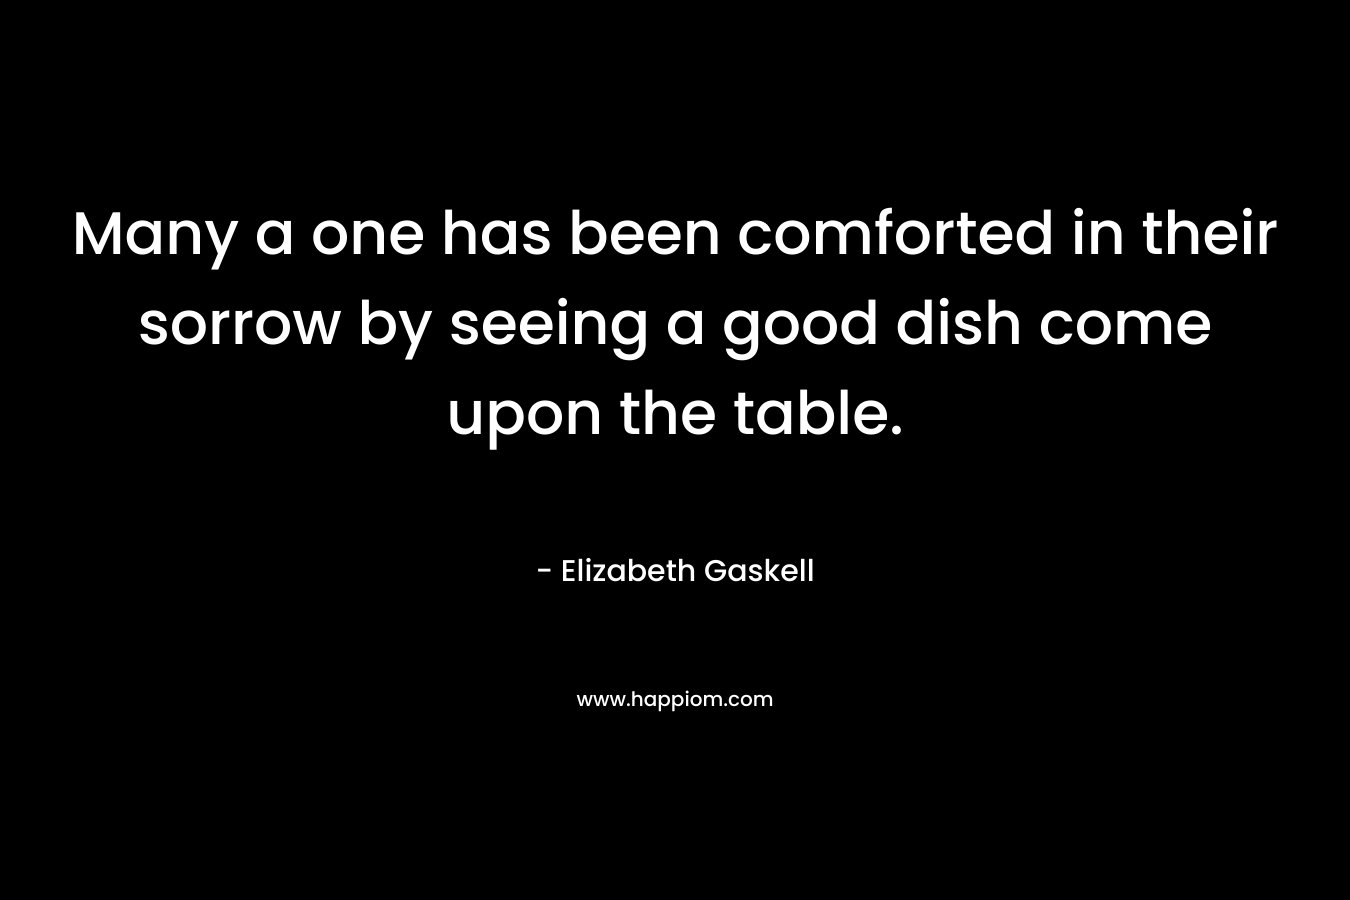 Many a one has been comforted in their sorrow by seeing a good dish come upon the table.